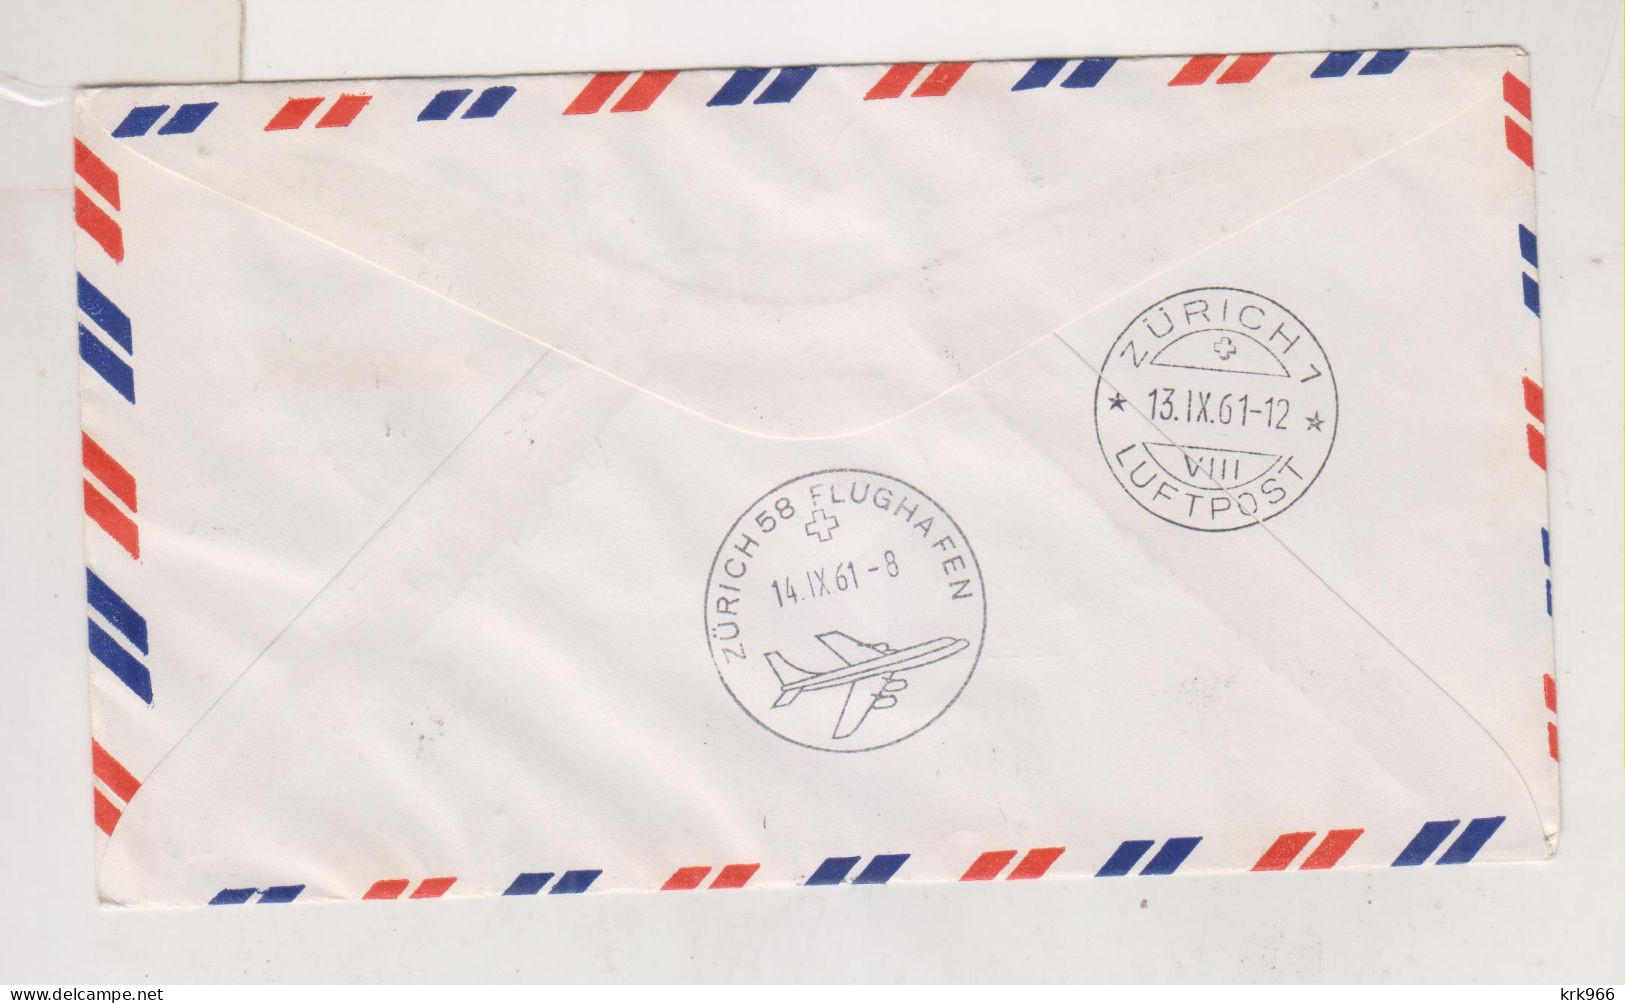 INDIA, 1961 Airmail Cover To Switzerland - Poste Aérienne